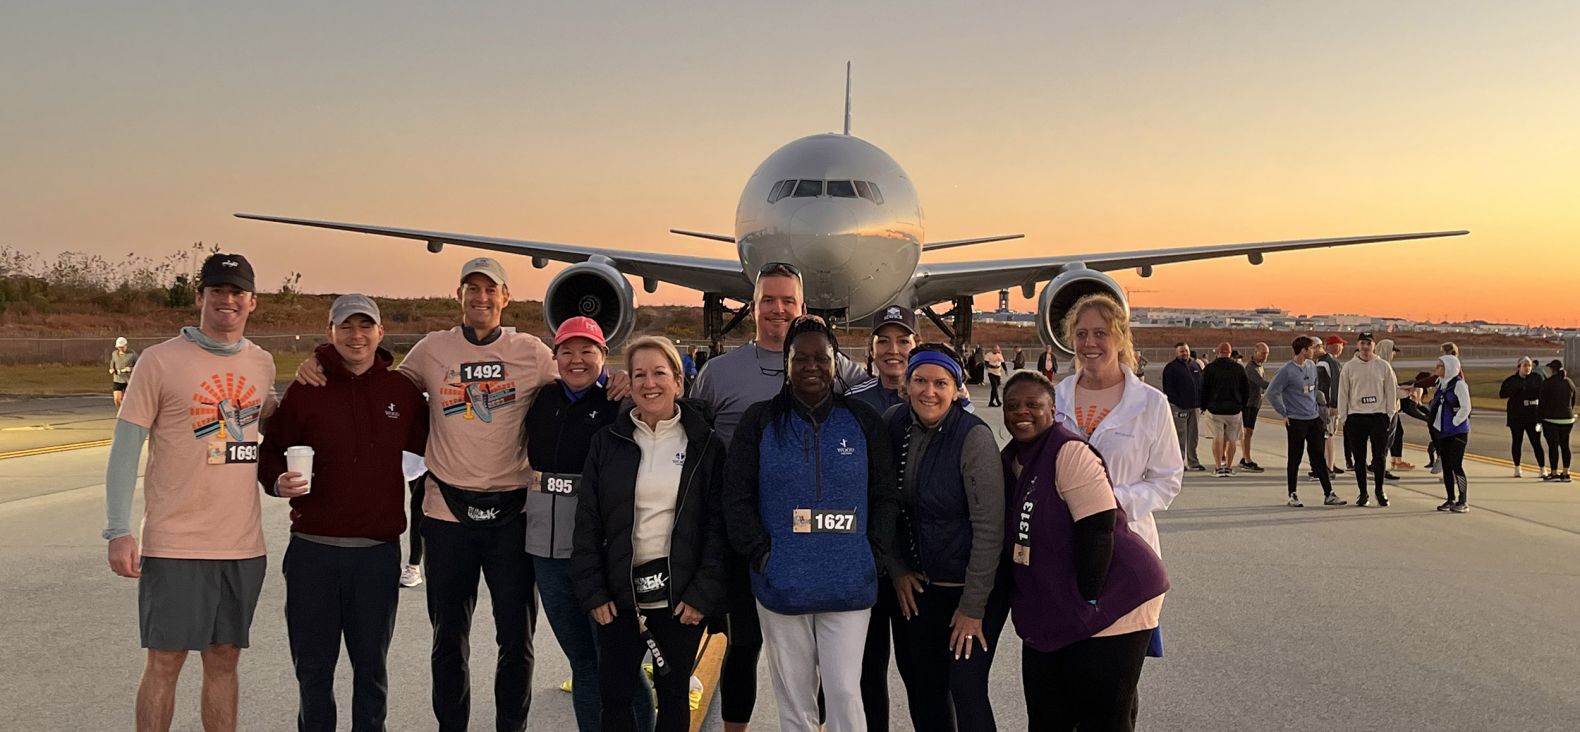 Group of co-workers standing in front of an airplane on a tarmac 